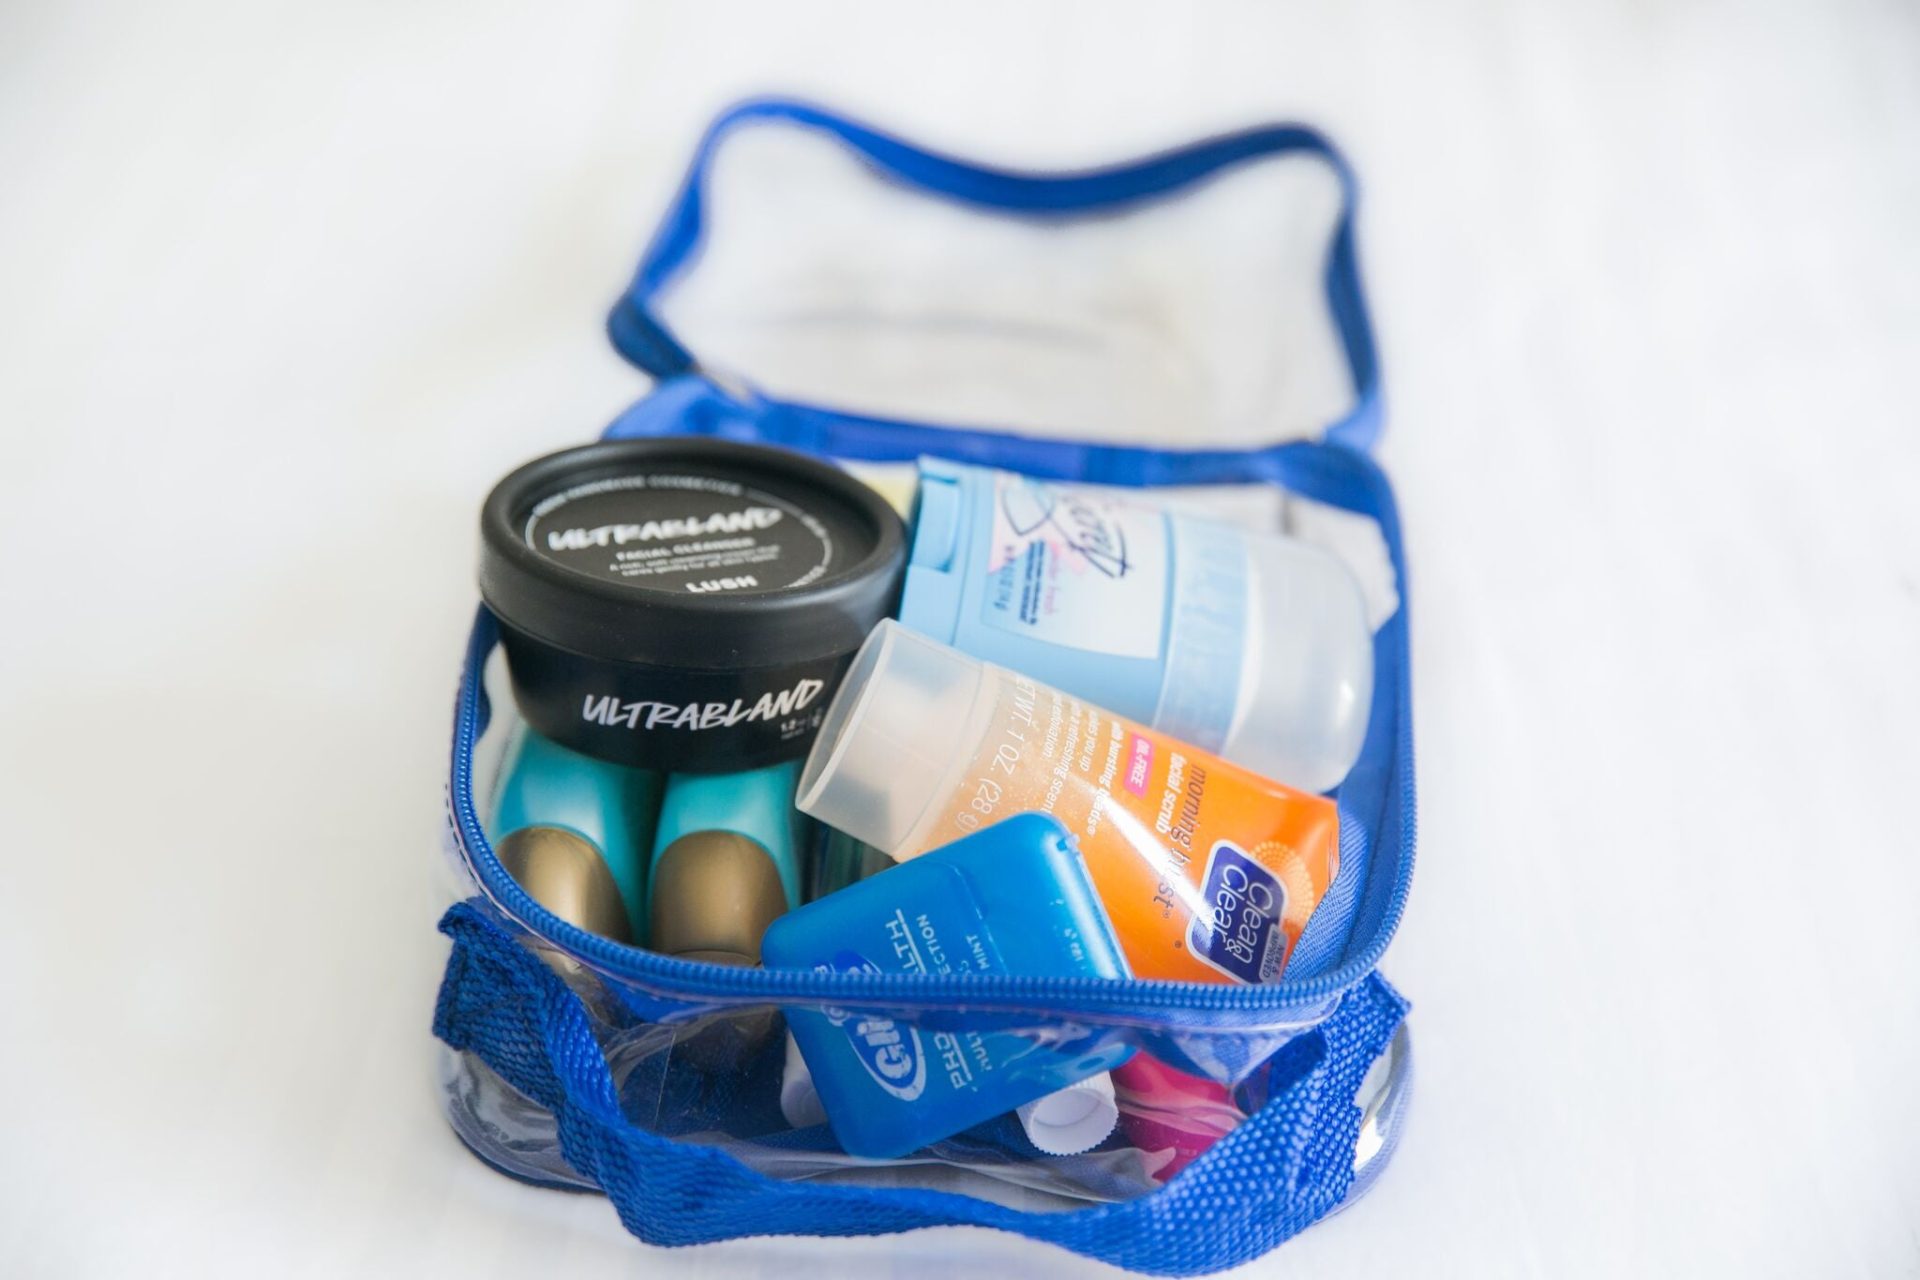 How to pack toiletries in packing cube